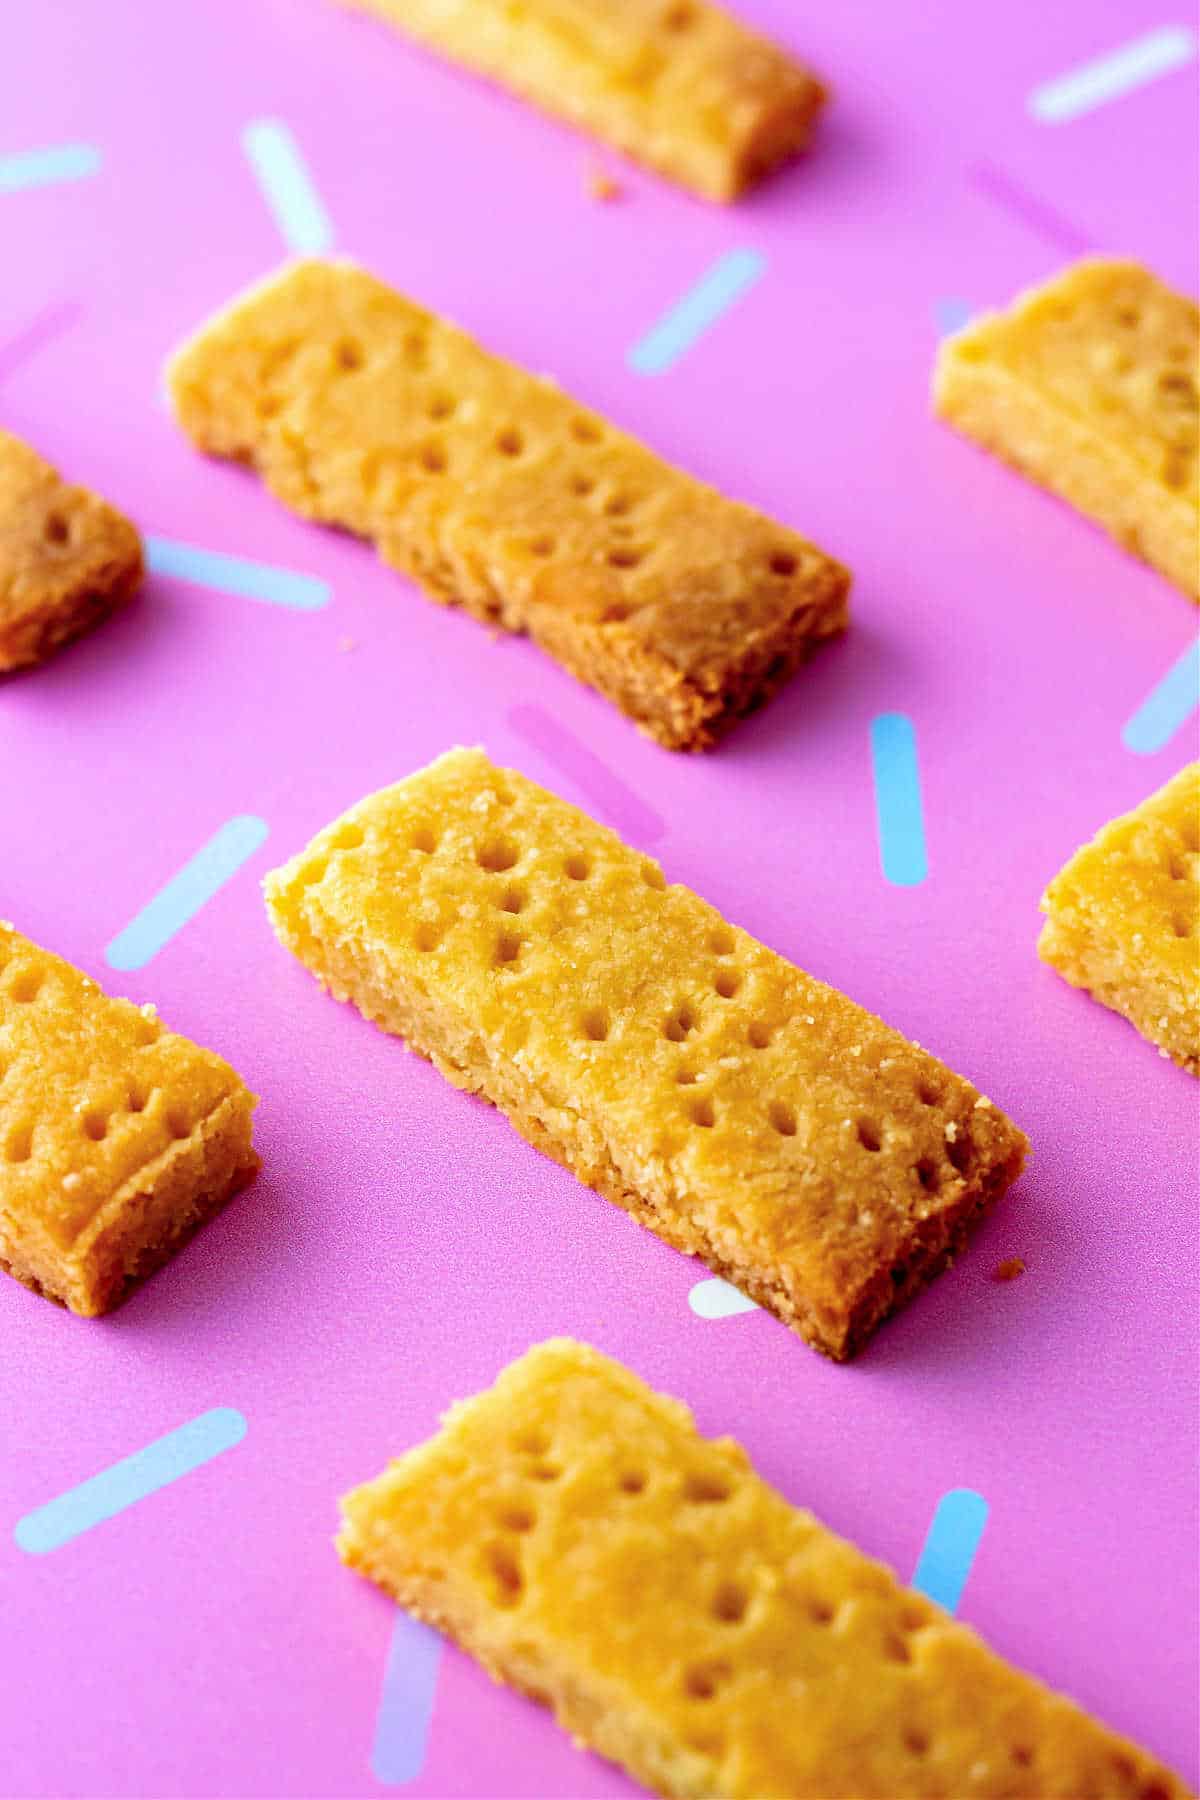 Rows of bars of shortbread on a pink background.